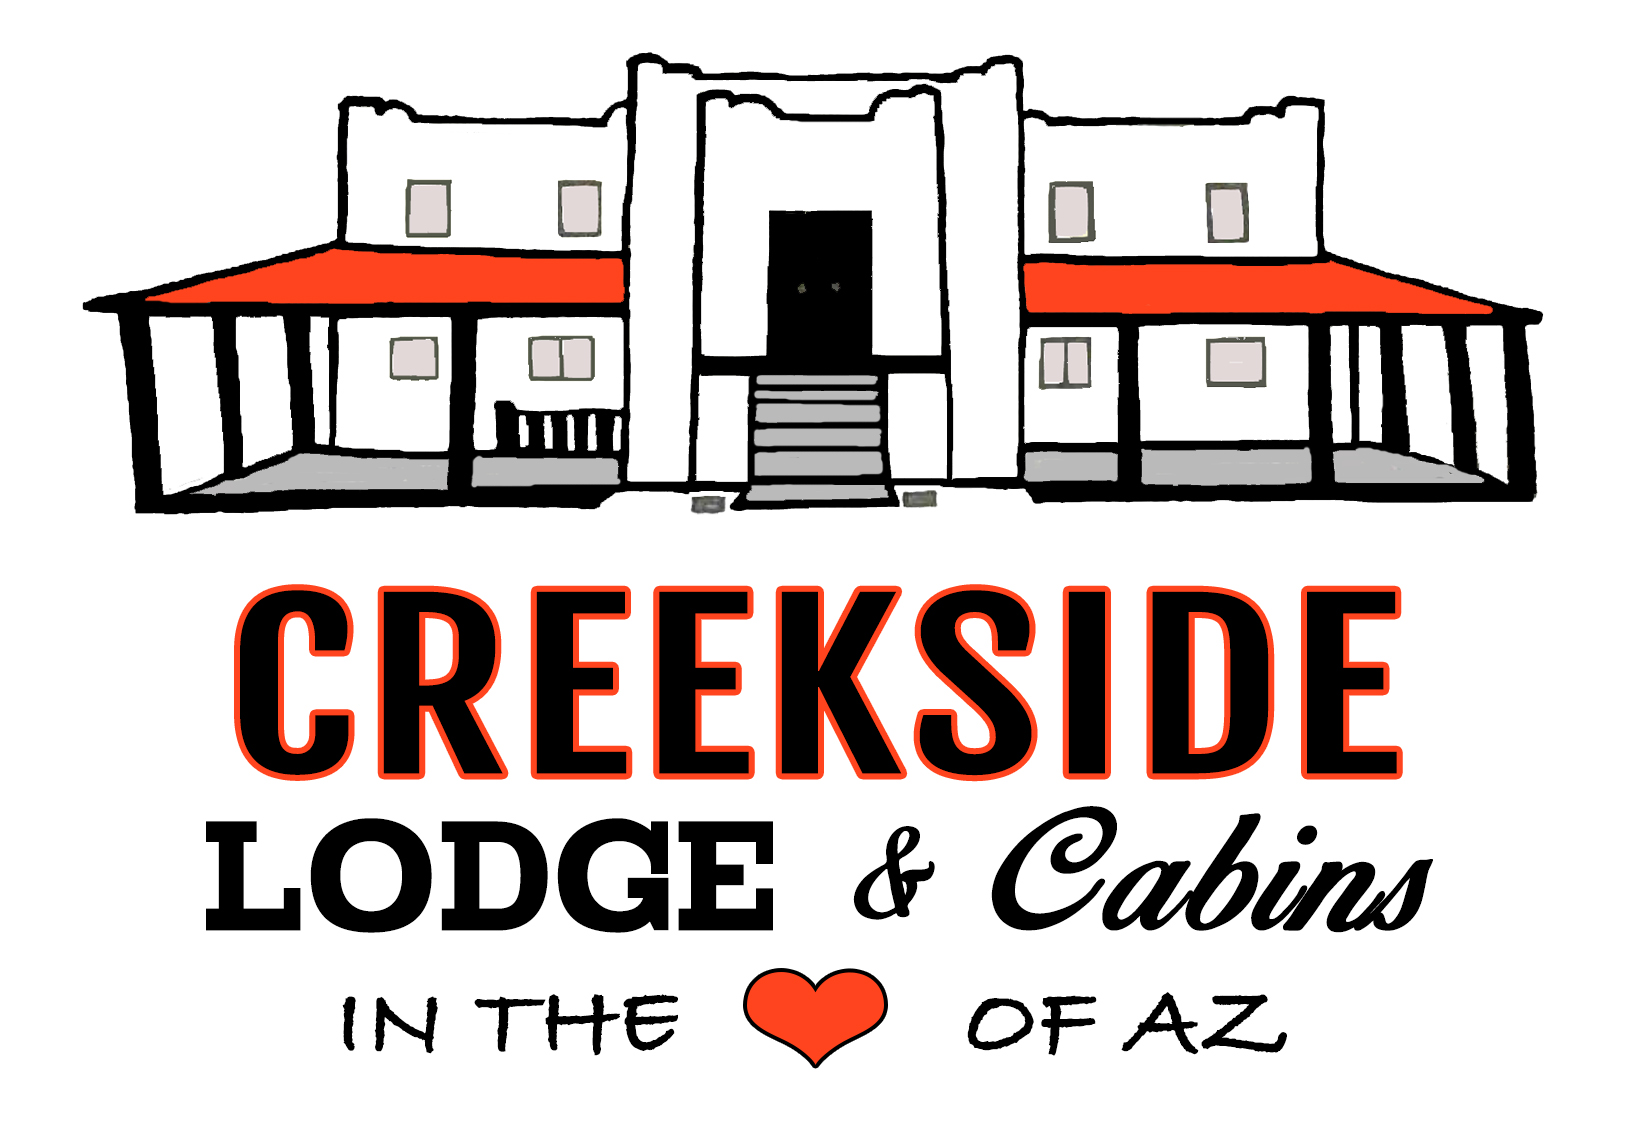 Creekside Lodge and Cabins Announces TwoDay Country Concert "Country